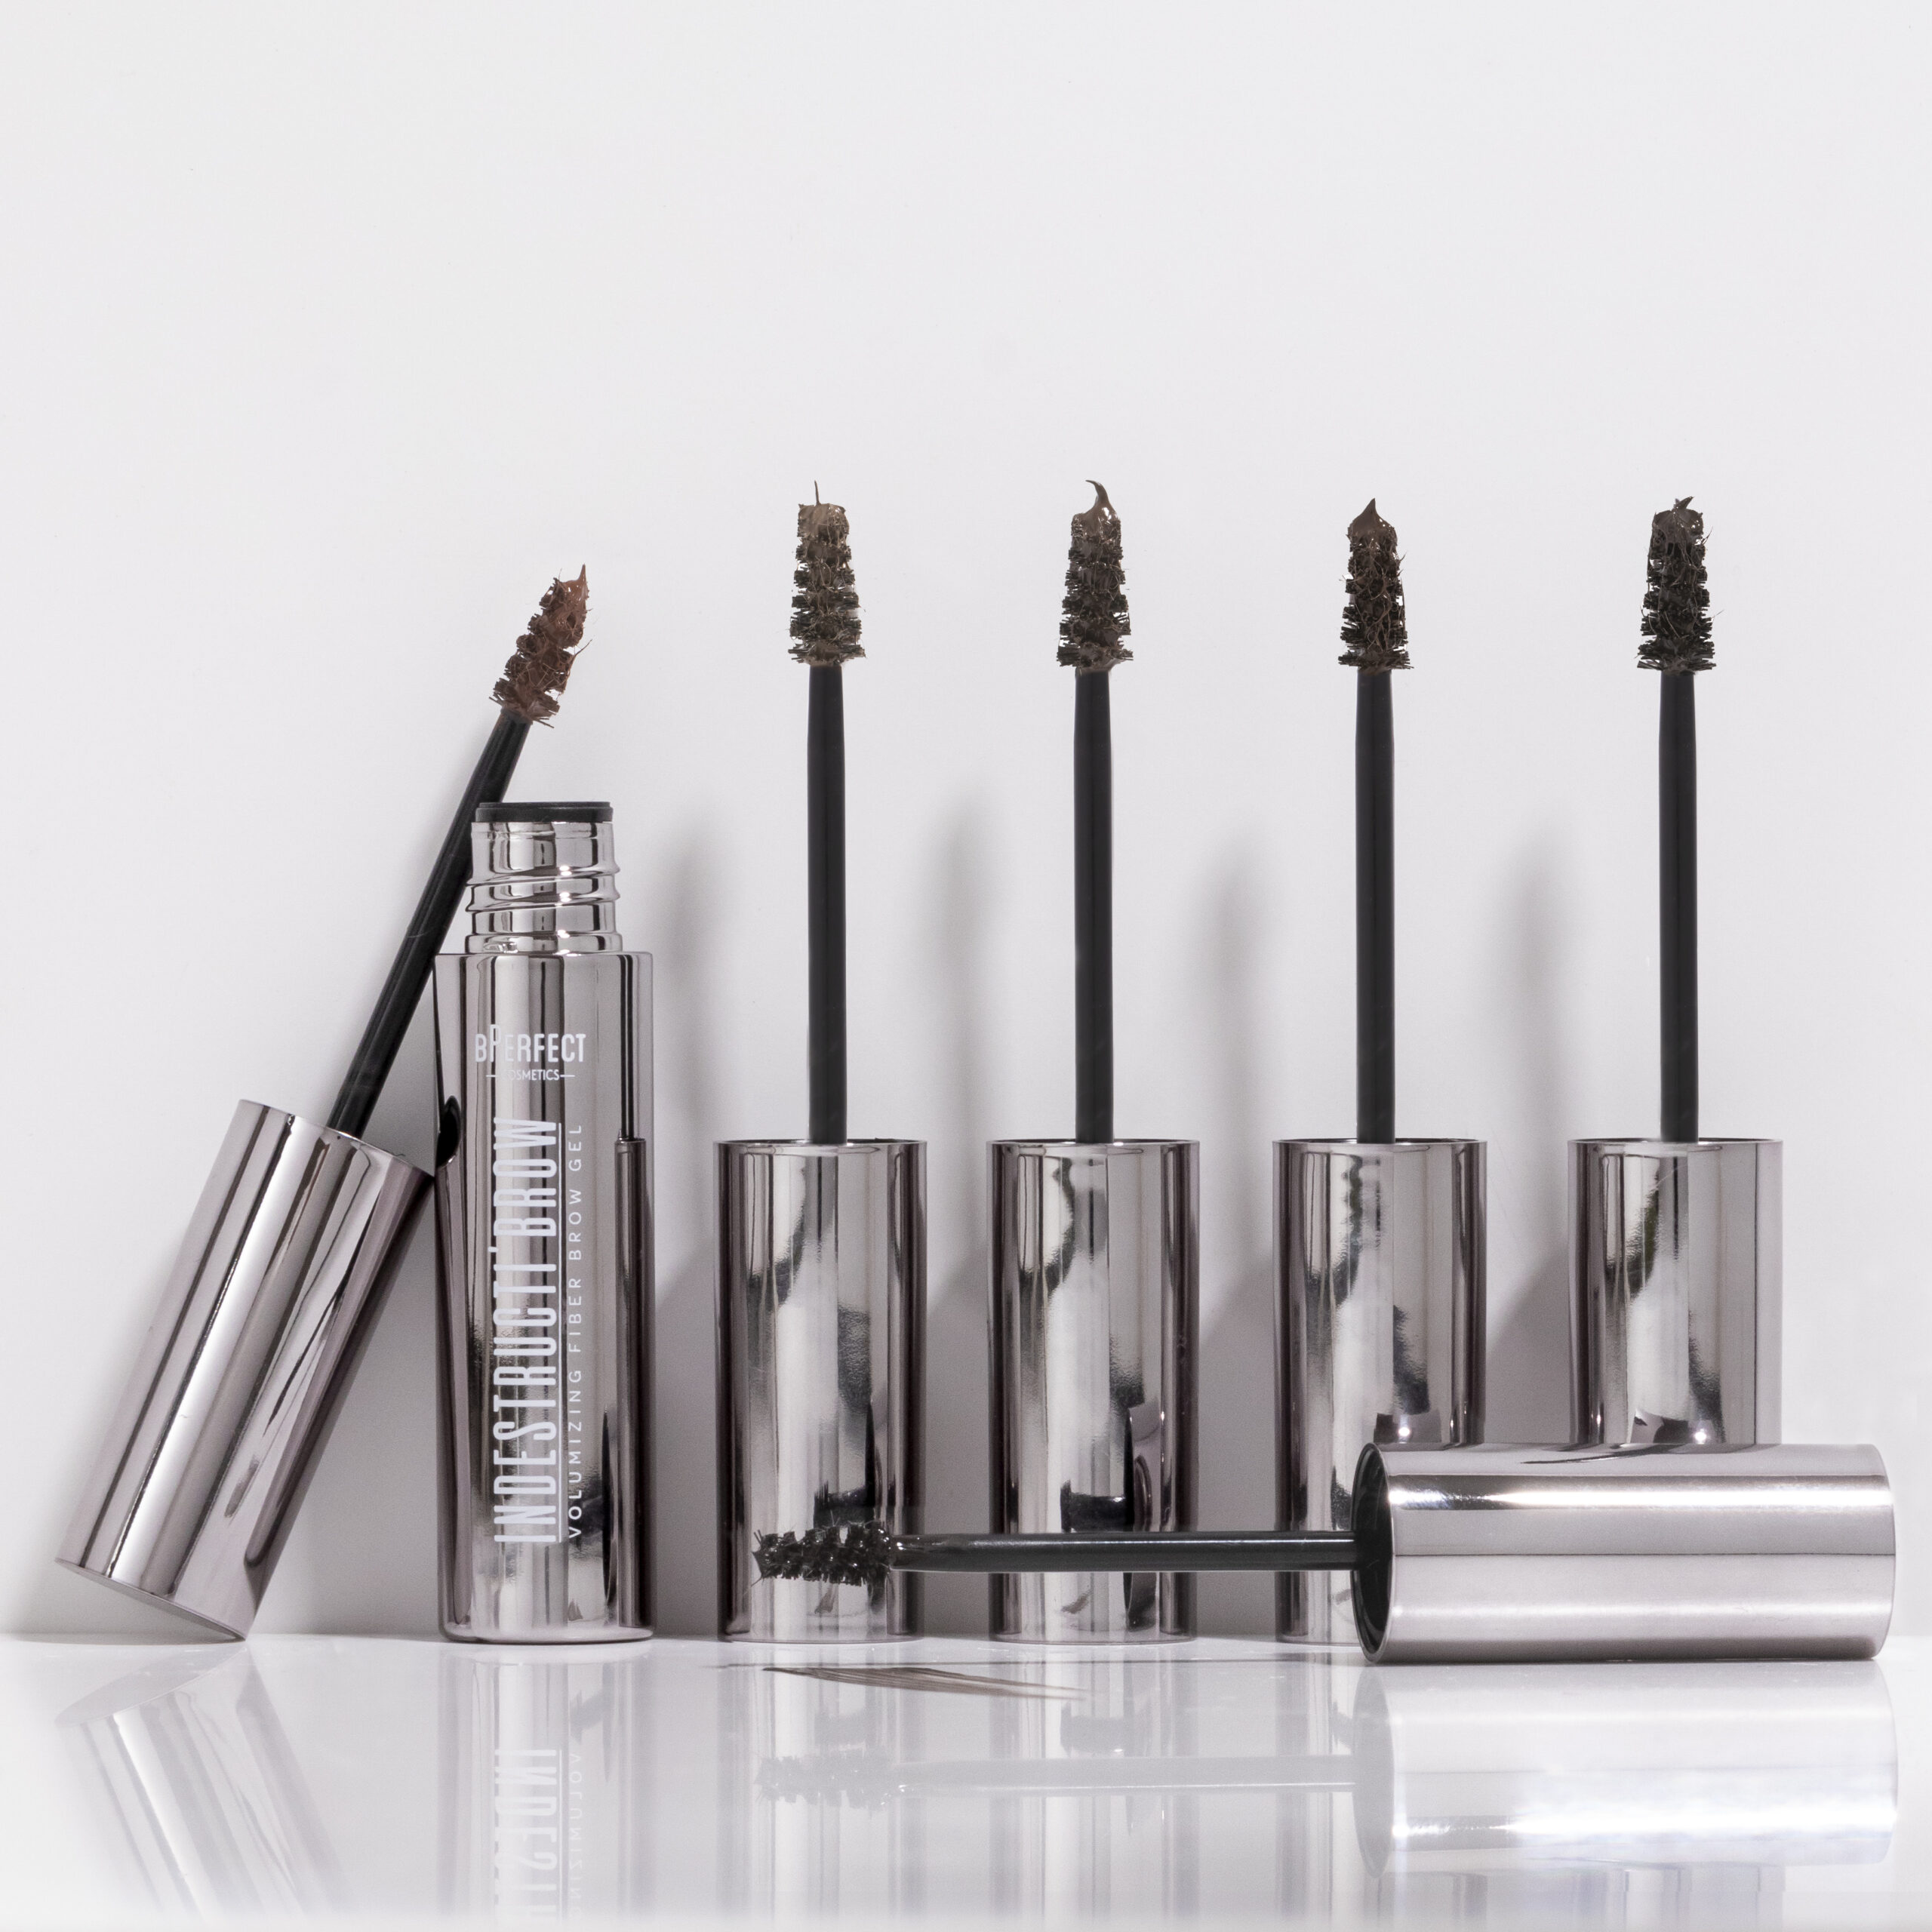 BPerfect Cosmetics Unveils The Latest Addition To Their Indestructi’brow Collection With The Brand New Brow Fiber Gel Mascara